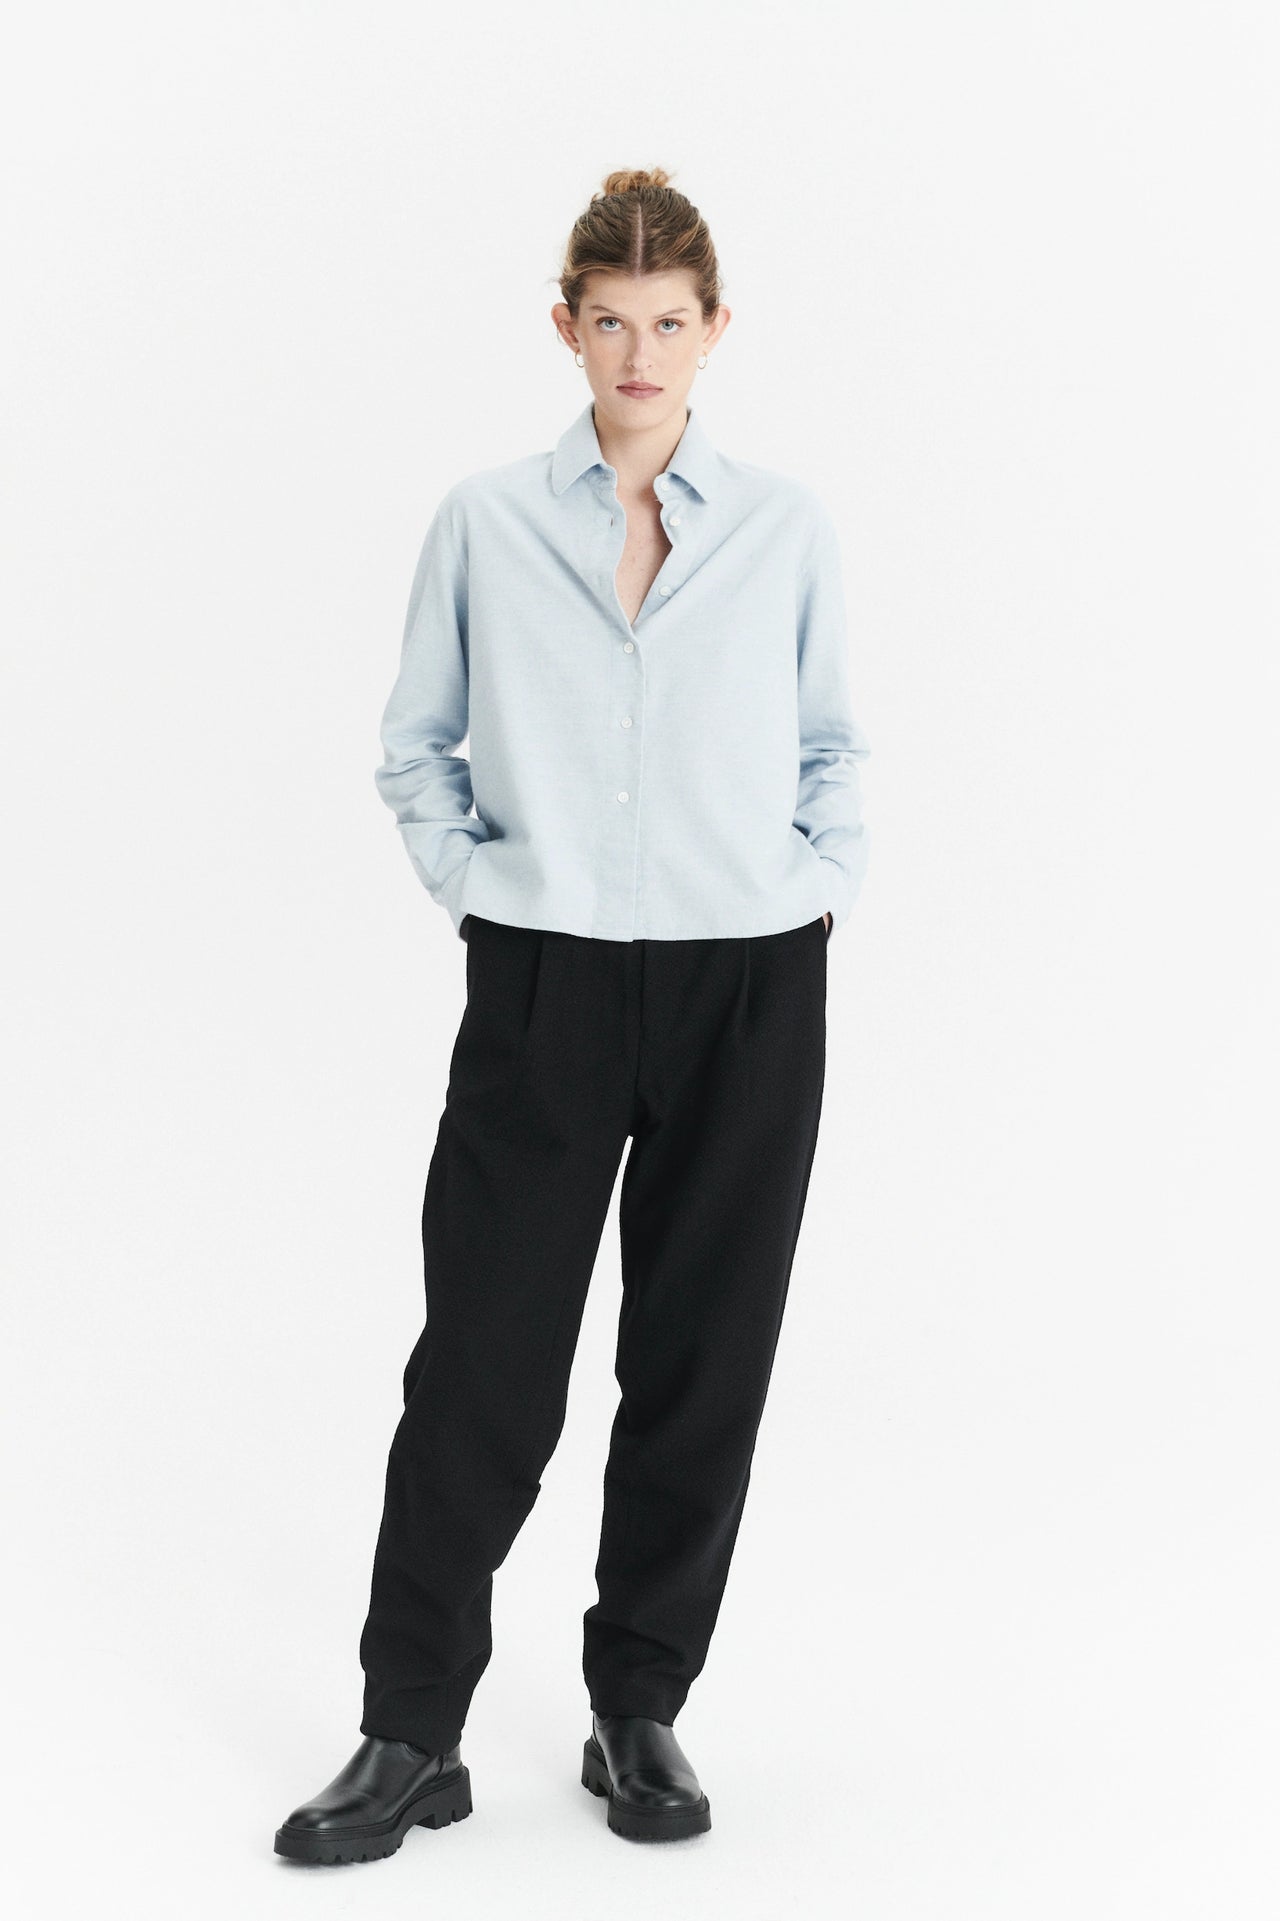 Relaxed Cropped Blouse in a Baby Blue Double Brushed Utterly Soft Italian Cotton Flannel